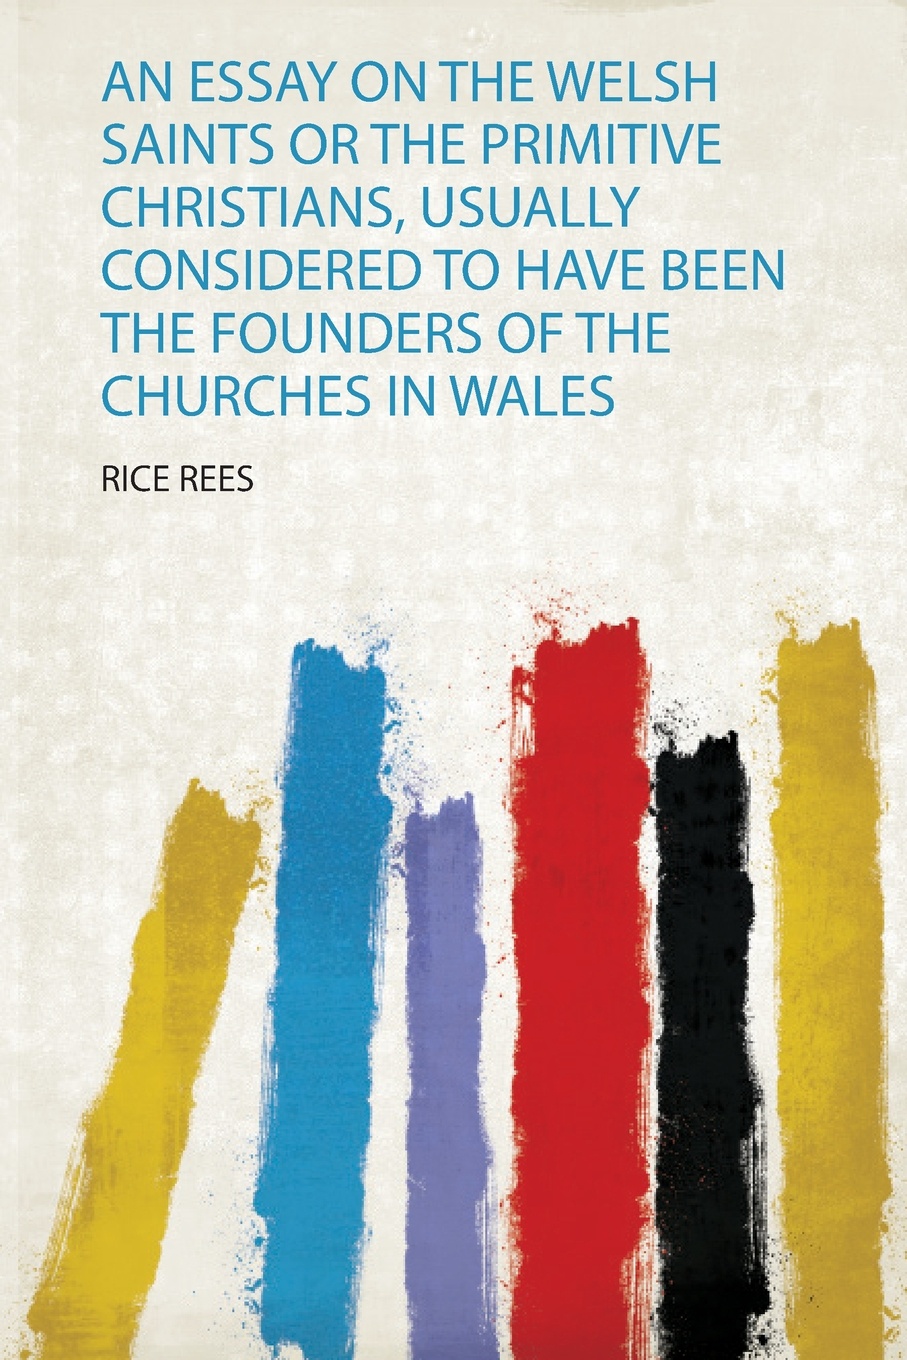 An Essay on the Welsh Saints or the Primitive Christians, Usually Considered to Have Been the Founders of the Churches in Wales